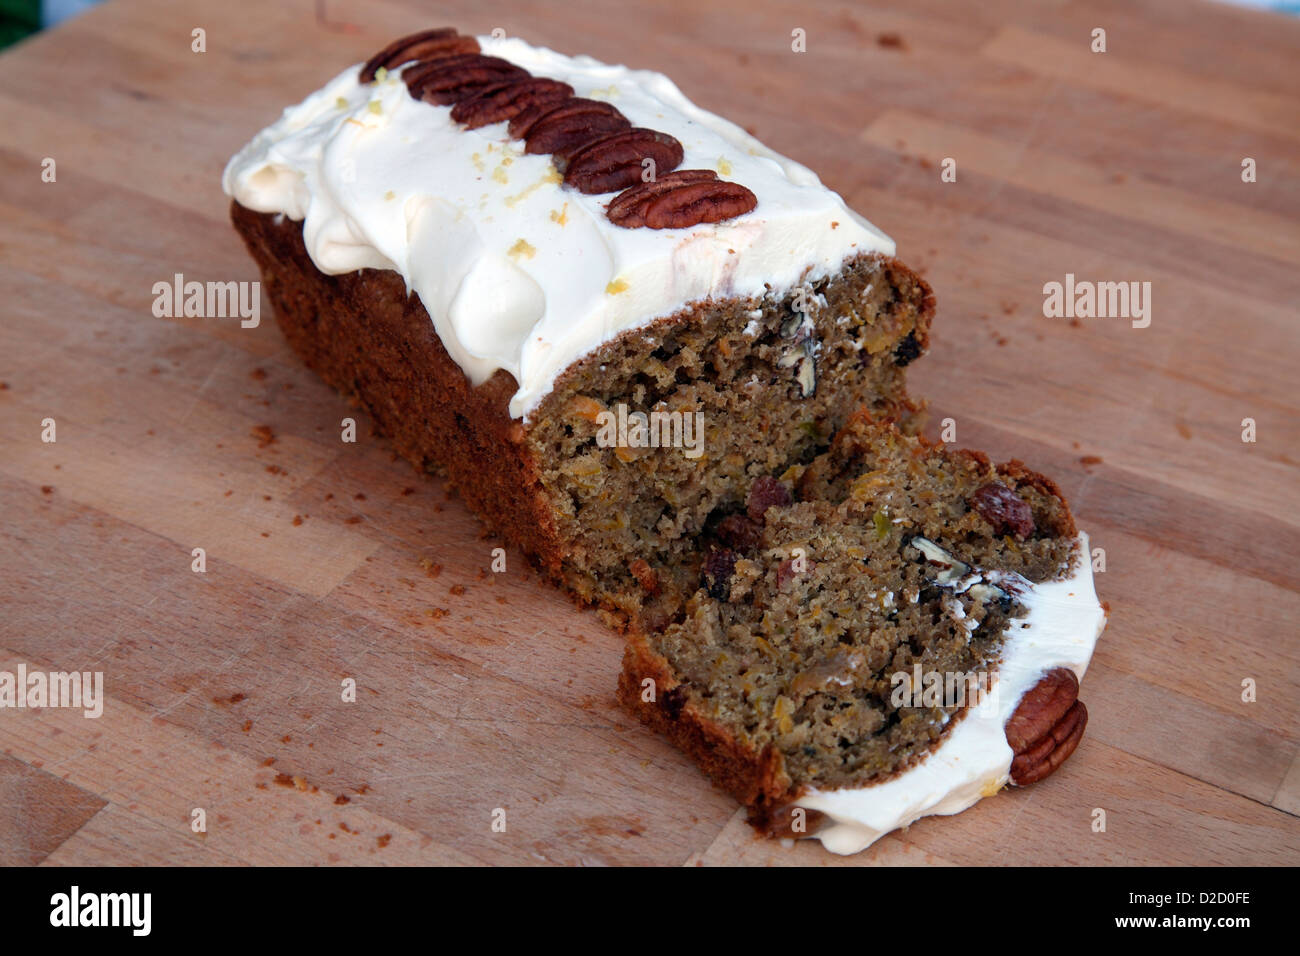 Carrot cake with cream cheese topping and decorated with pecan nuts Stock Photo